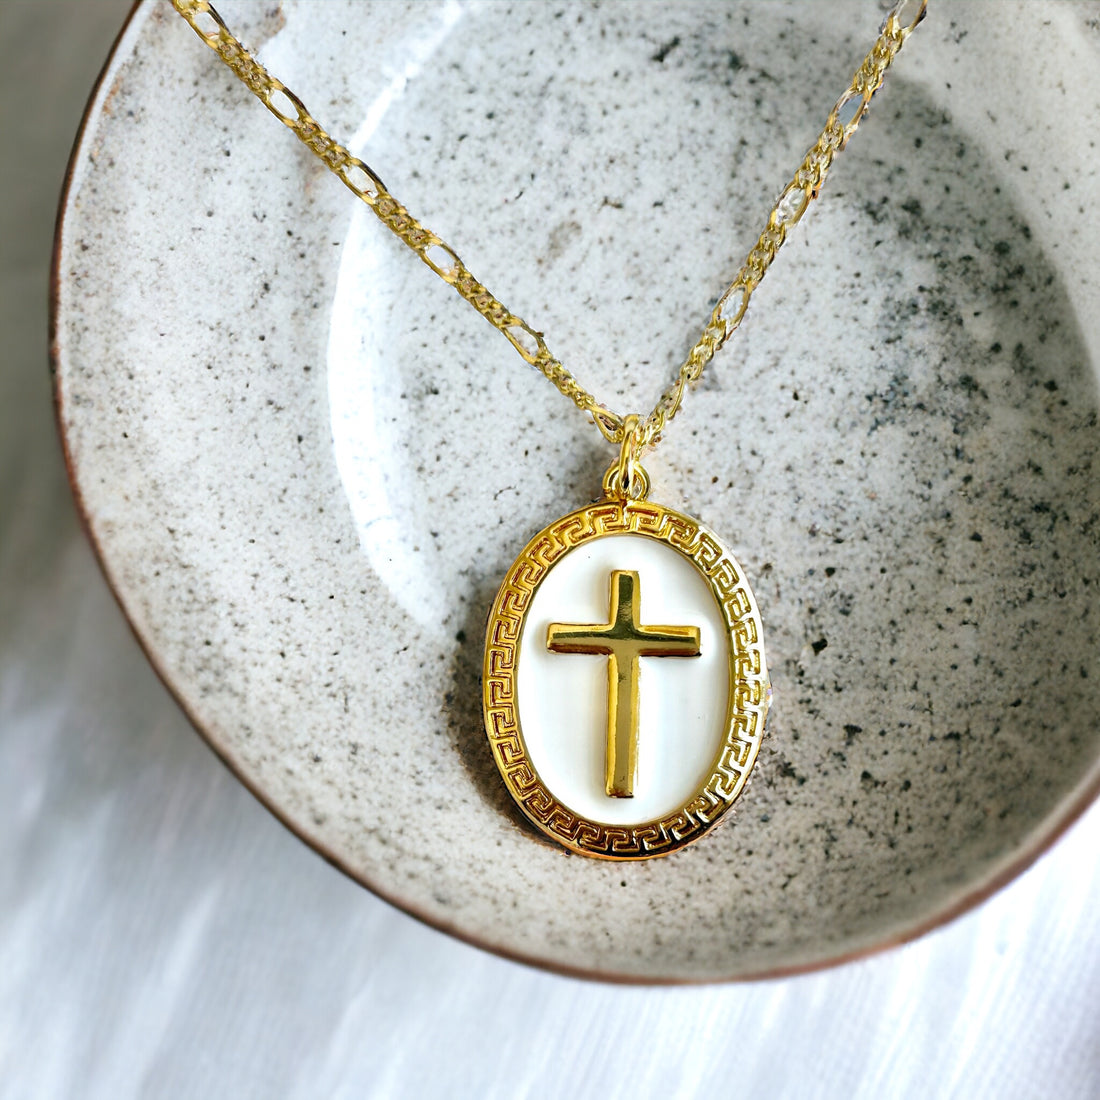 dainty cross necklace, gold cross necklace, religious necklace, gold necklace, christian jewelry, catholic jewelry, christian gifts, catholic gifts, catholic gift for her, first communion gift, baptism gift, wedding gift, christian wedding, bridesmade gift, diamond cross necklace